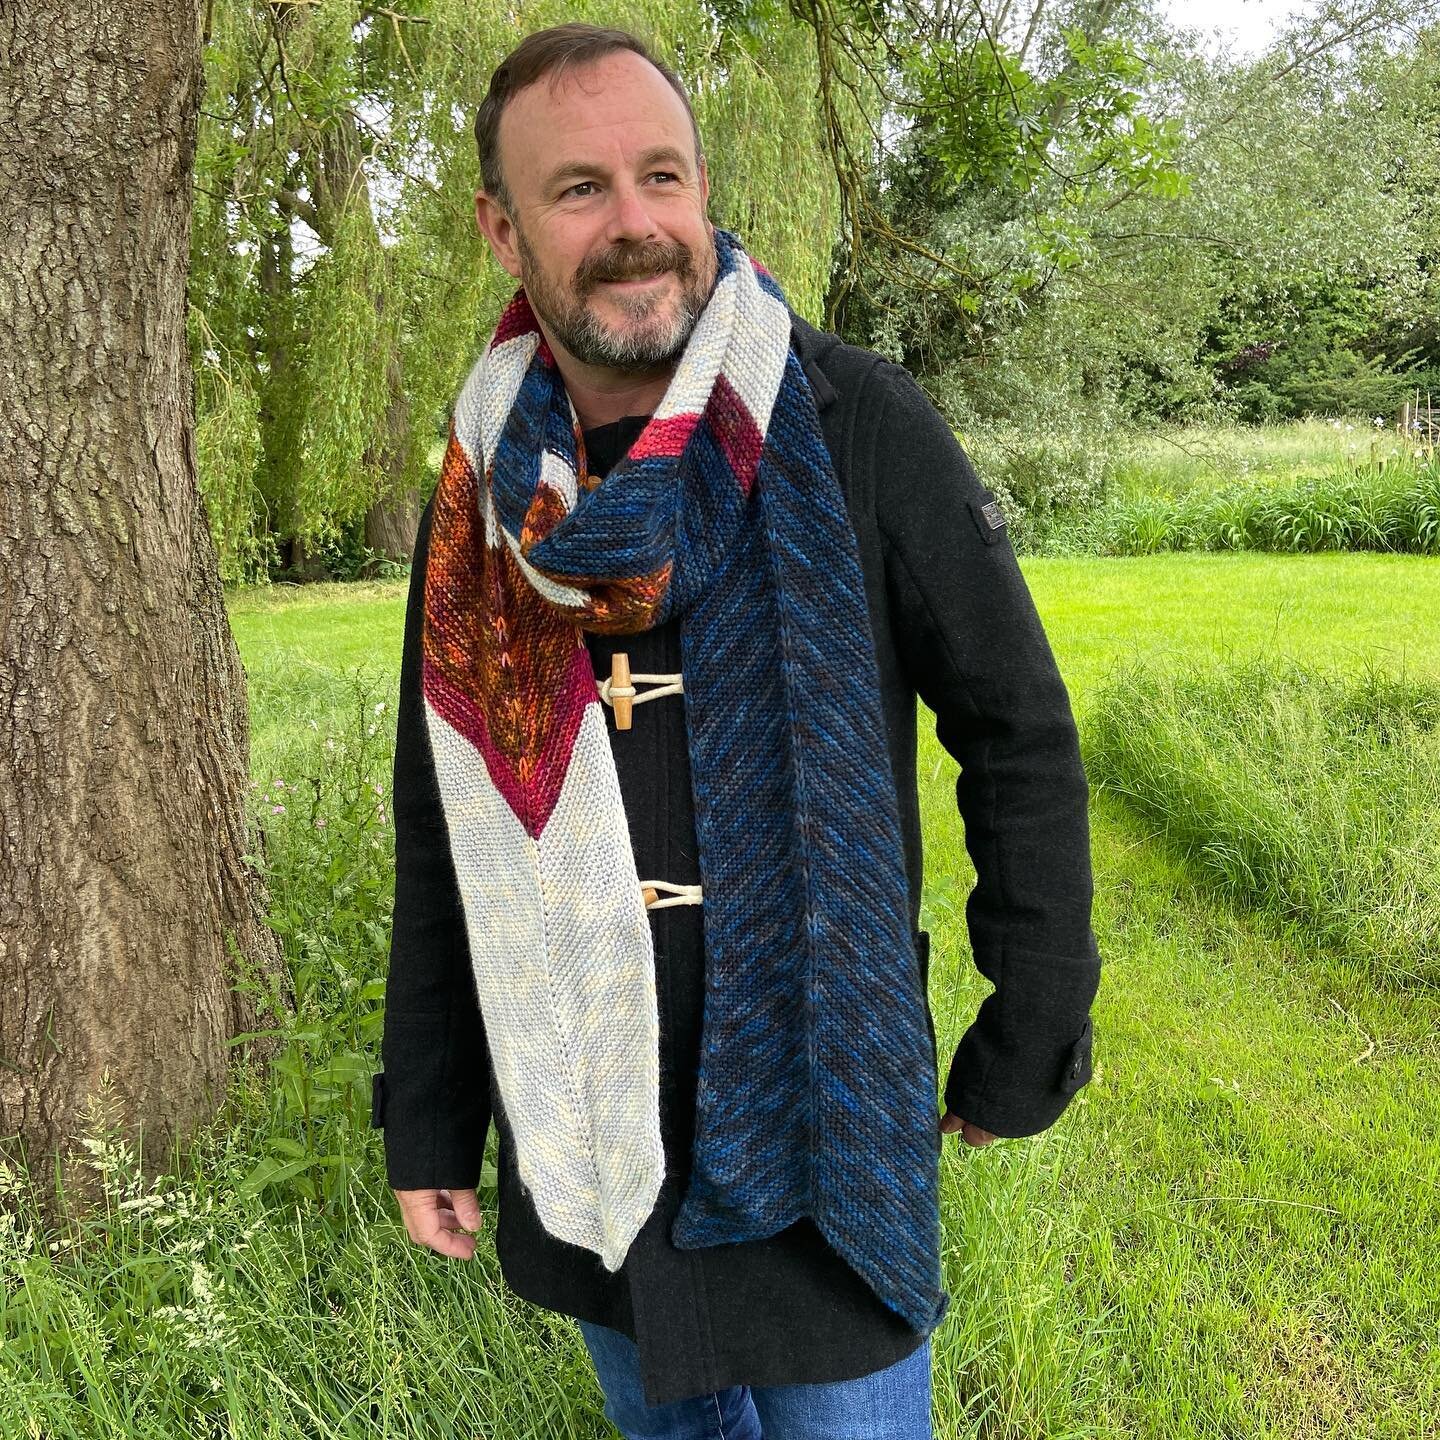 Another shout out for my Lionheart scarf. It&rsquo;s a chevron pattern and it makes a lovely pennant end. It reminds me of the medieval Pennant flags, and my mind flashes back to Julian Glover as King Richard the Lionheart in Dr Who. #yarnstore #knit